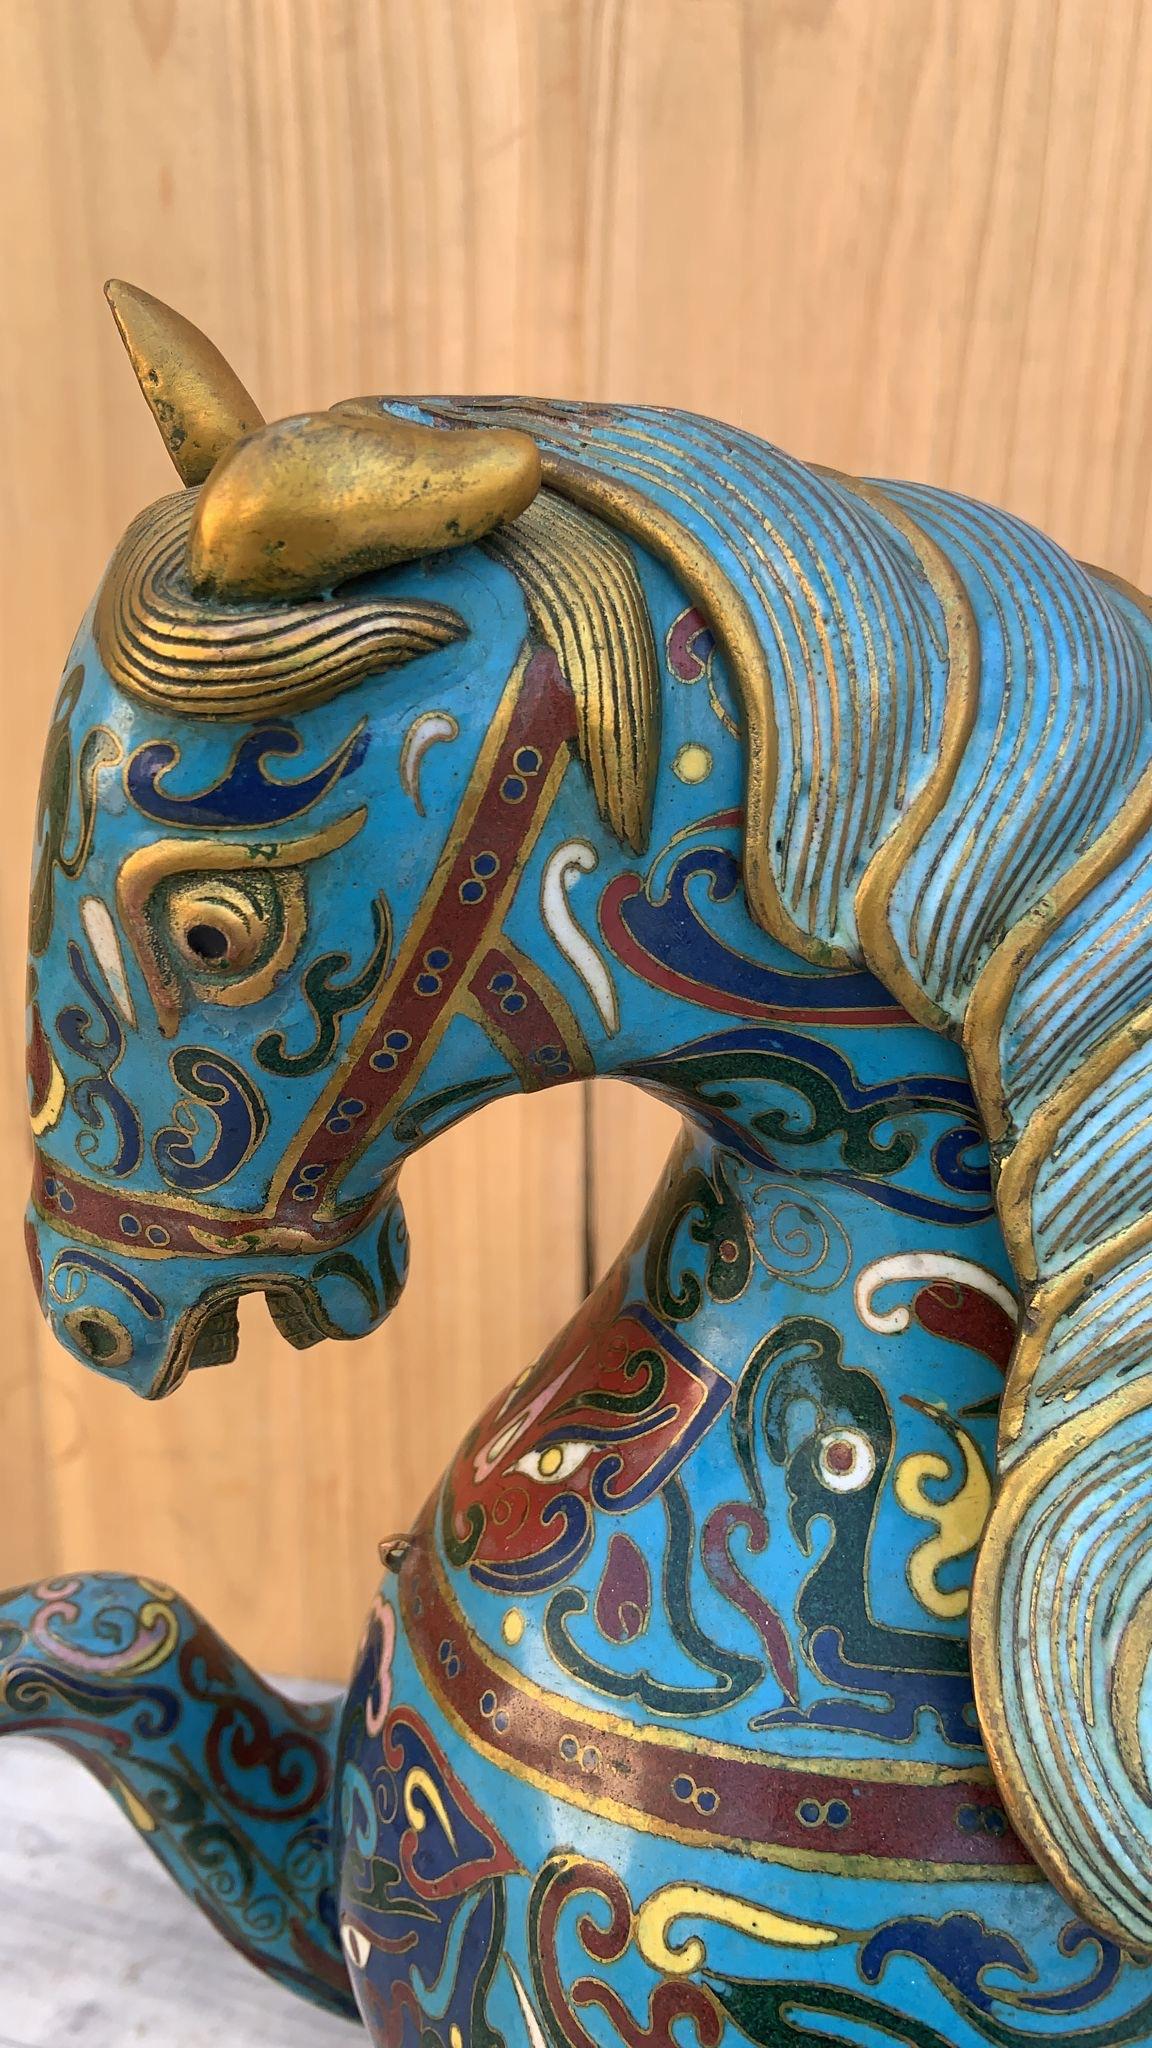 Vintage Chinese Cloisonné War Horse Sculptures on Mahogany Base - Pair For Sale 3